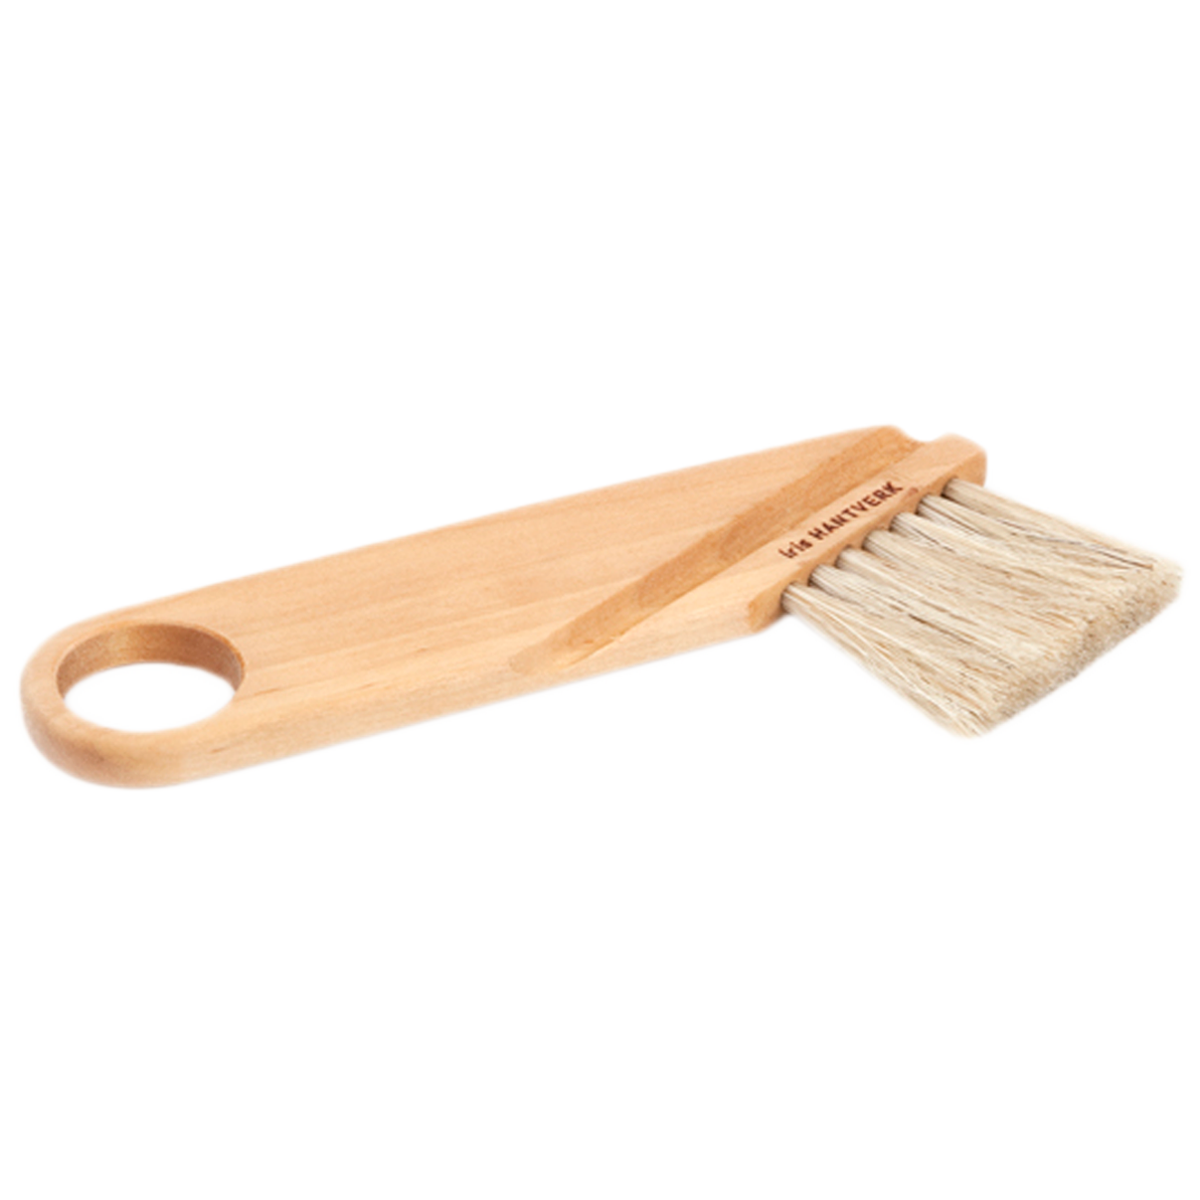 Pastry brush oiltreated birch Large